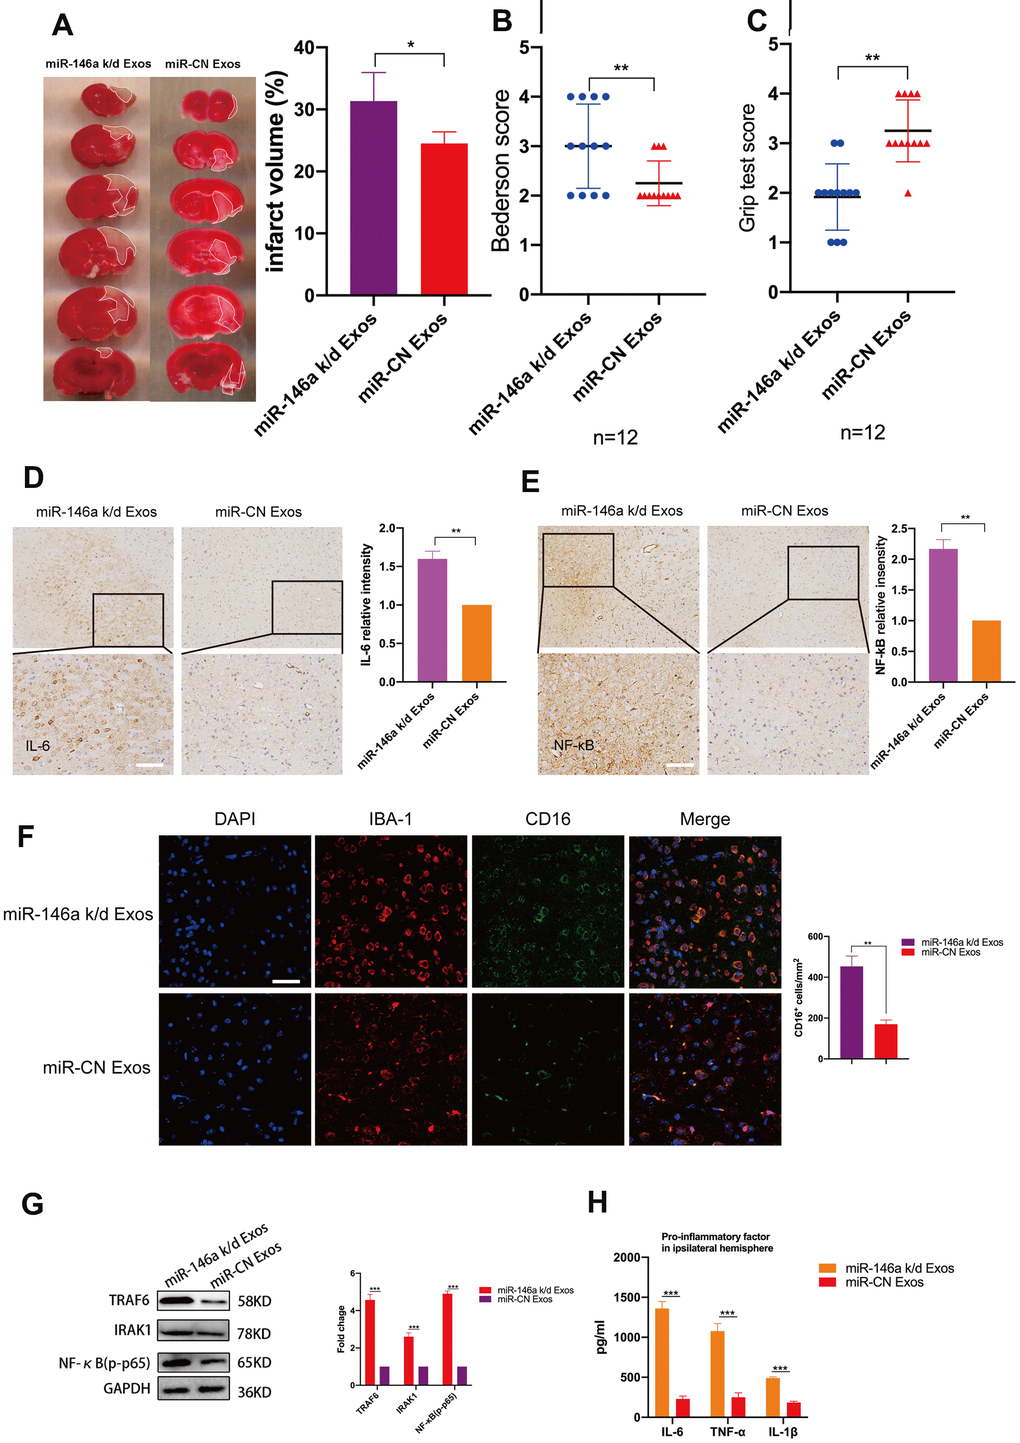 Treatment with hUMSC-Exos decreases neuroinflammation and is neuroprotective by down-regulating IRAK1/TRAF6 signaling pathway activity in vivo. (A) Representative photomicrographs of TTC-stained tissue from wild-type versus miR-146a-5p knockdown hUMSC-Exos groups, with infarct size as calculated using ImageJ software. Data are expressed as mean ± SEM (n = 6 per group). Significant differences are indicated (*p B, C) Neurological deficit scores in vehicle-only versus experimental groups at 72 hours post-reperfusion. Data are expressed as mean ± SEM (n = 12 per group). Significant differences are indicated (*p **p D, E) Representative photomicrographs of IL-6 and NFκB in the ischemic penumbra 72 hours post-reperfusion, with associated relative intensities as calculated using ImageJ software. Scale bar: 50 μm. Data are expressed as mean ± SEM (n = 6 per group). Significant differences are indicated (*p F) Microglial M1 markers IBA-1 and CD16 in the ischemic penumbra 3 days following ischemic stroke. (G) Expression of signaling pathway IRAK1, TRAF6, and NFκB (p65) in the wild-type versus miR-146a-5p knockdown groups. (H) Determination of IL-6, TNF- α, and IL-1β protein levels via ELISA. Data are expressed as mean ± SEM (experiments were performed in triplicate). Significant differences are indicated (*p 